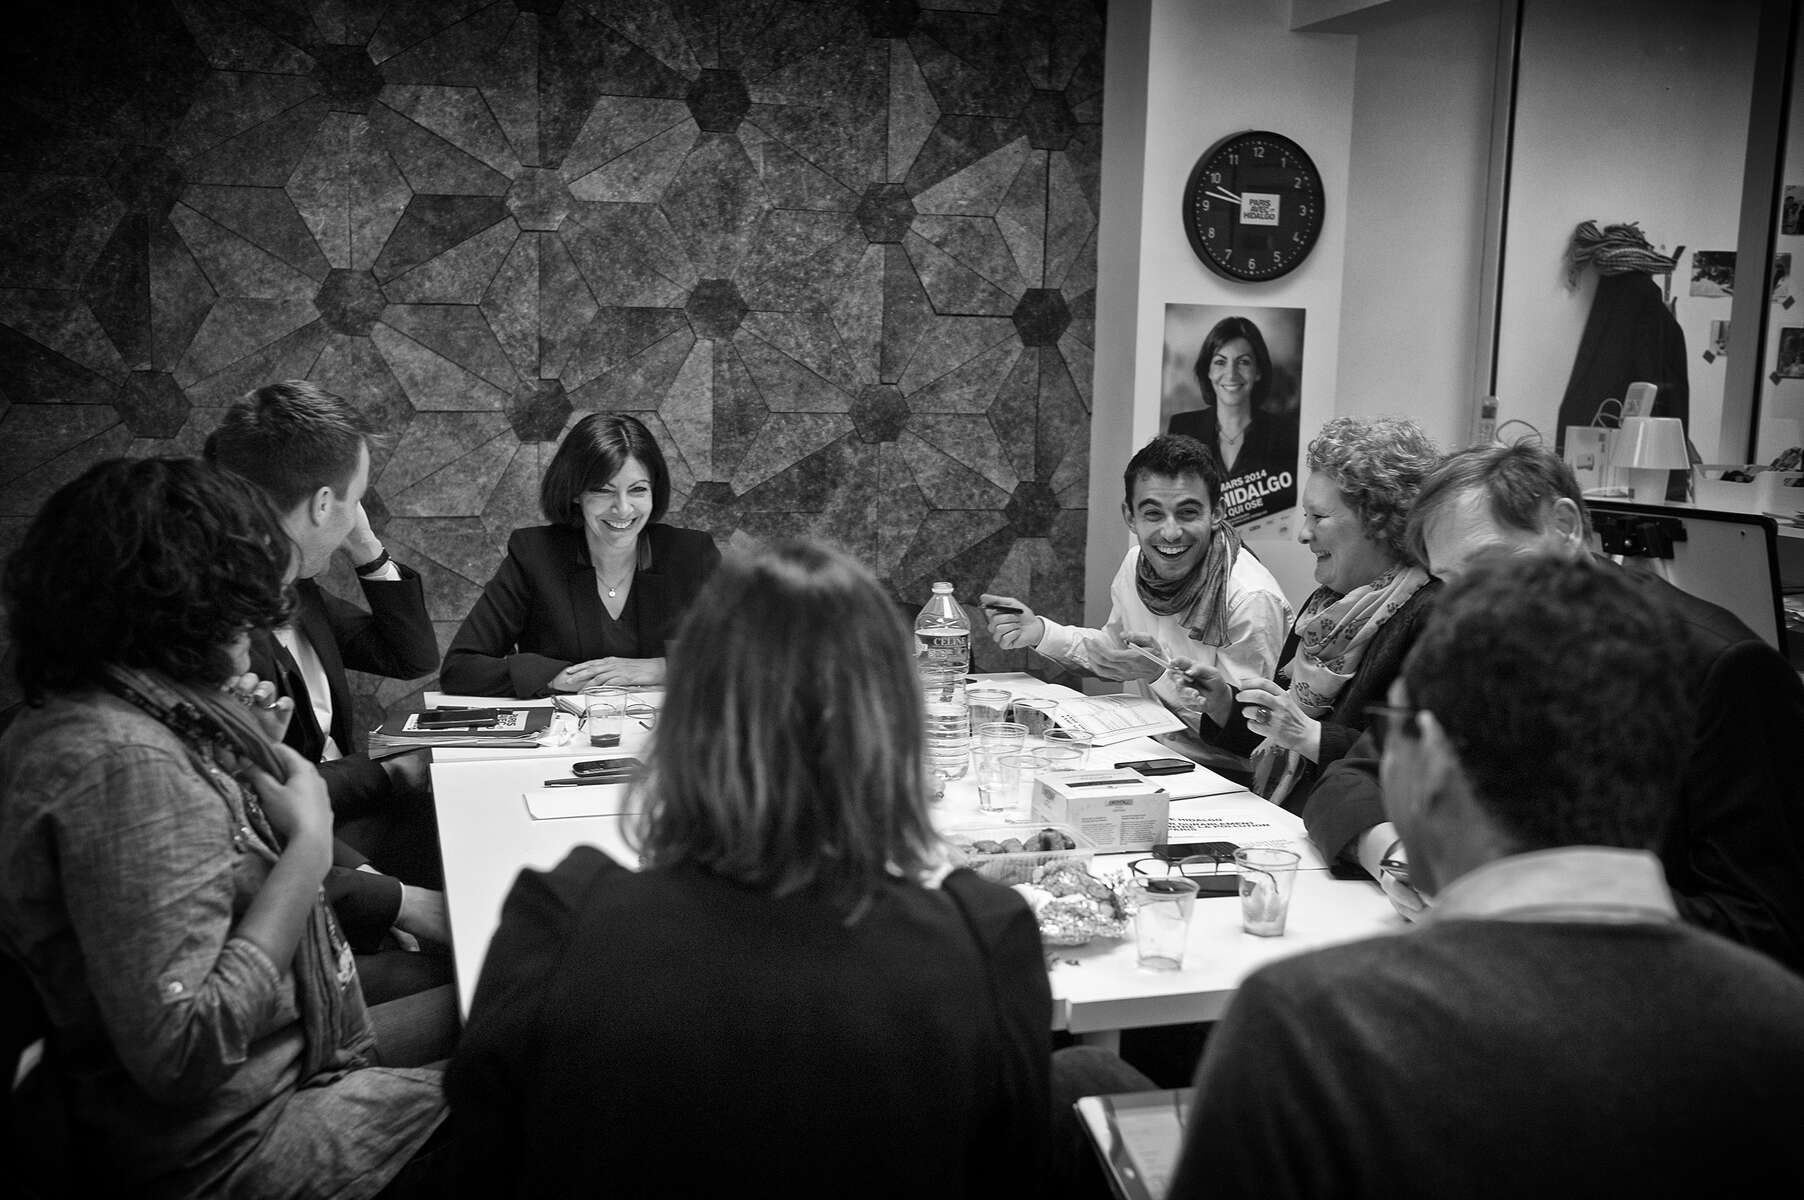 March 17, 2014.  PARIS, FRANCE- Mayoral candidate Anne Hidalgo meets with senior staff in her campaign's headquarters in Paris' Bastille neighborhood, including spokespeople Myriam El Khomri and Bruno Julliard, campaign co-directors Remi Feraud and Jean-Louis Missika (around Hidalgo), press liaison Hervé Marro, campaign coordinator Alexandra Cordebard, communications expert Philippe Grangeon, director of staff Jean-Marie Vernat, chief of staff Laure Moline, and advisor Elisa Yavchitz.   For the first time in France's history, Paris will have a woman as a mayor - either Socialist Anne Hidalgo or Center-Right Nathalie Kosciusko-Morizet.  Photo by Scout Tufankjian